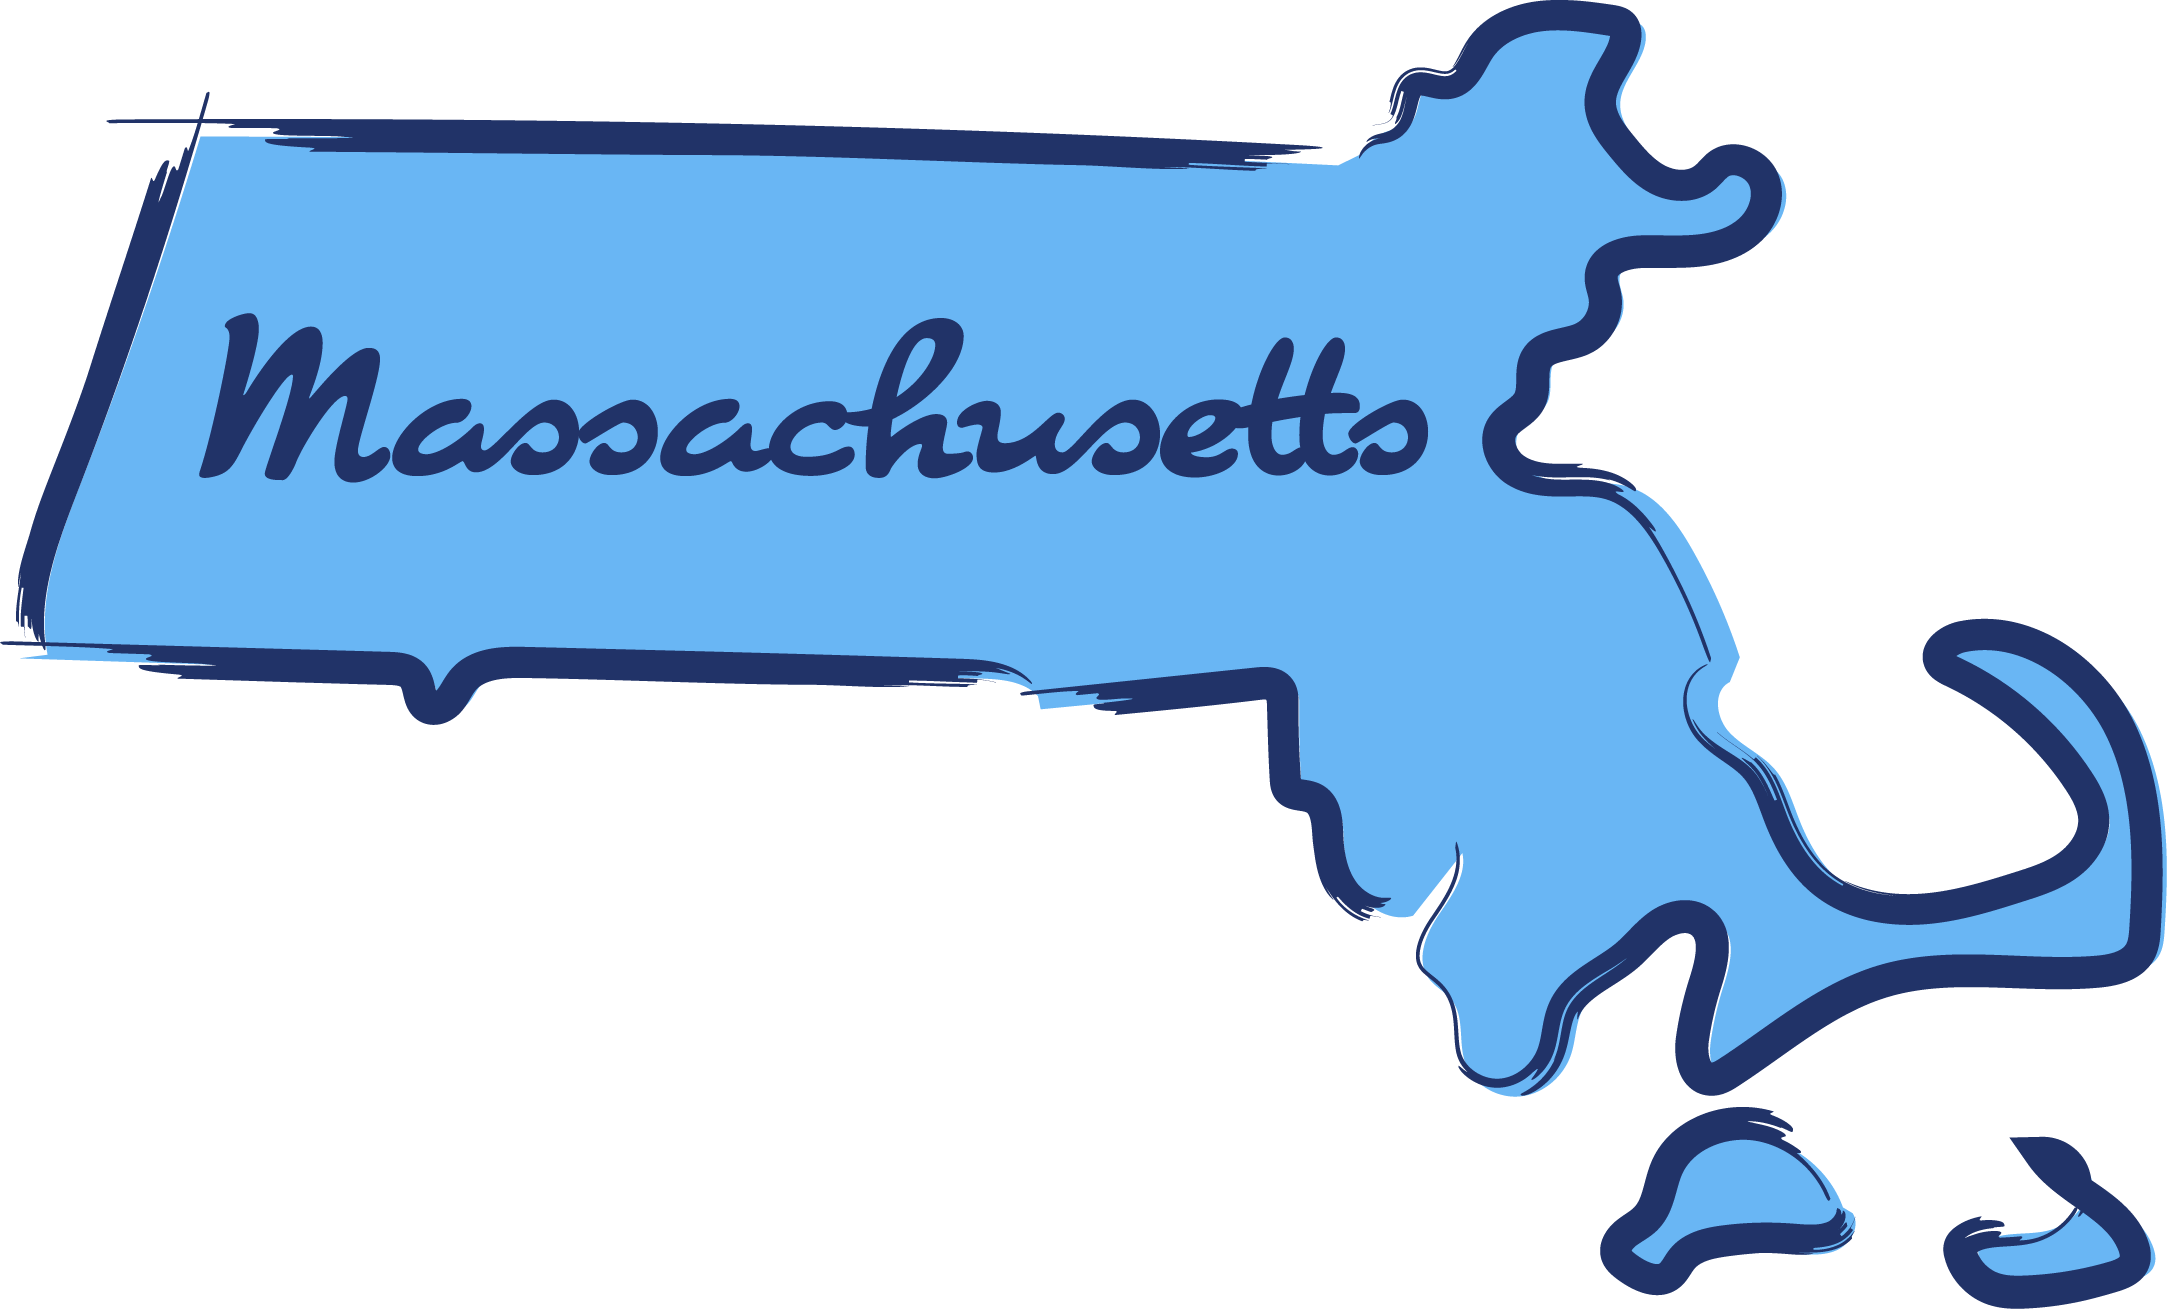 Massachusetts state map with script font